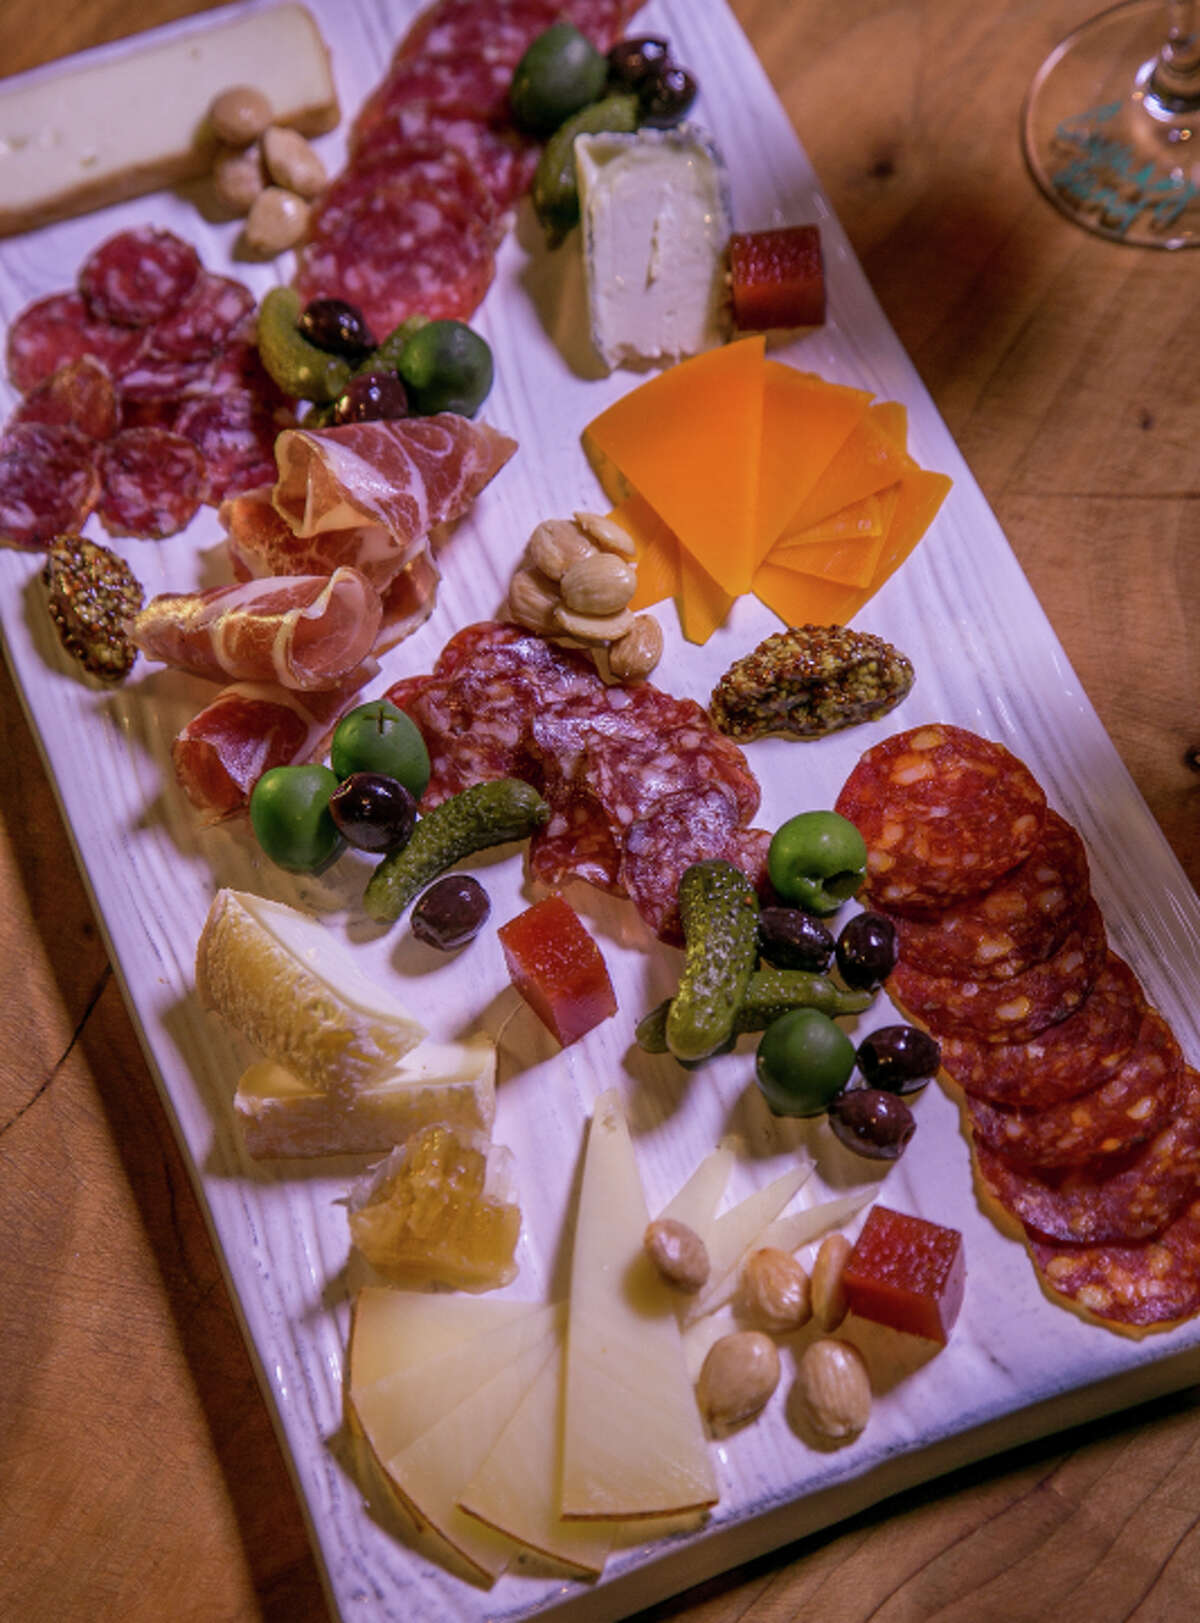 The charcuterie plate at Les Clos comes in a striking presentation, with the meats changing regularly.